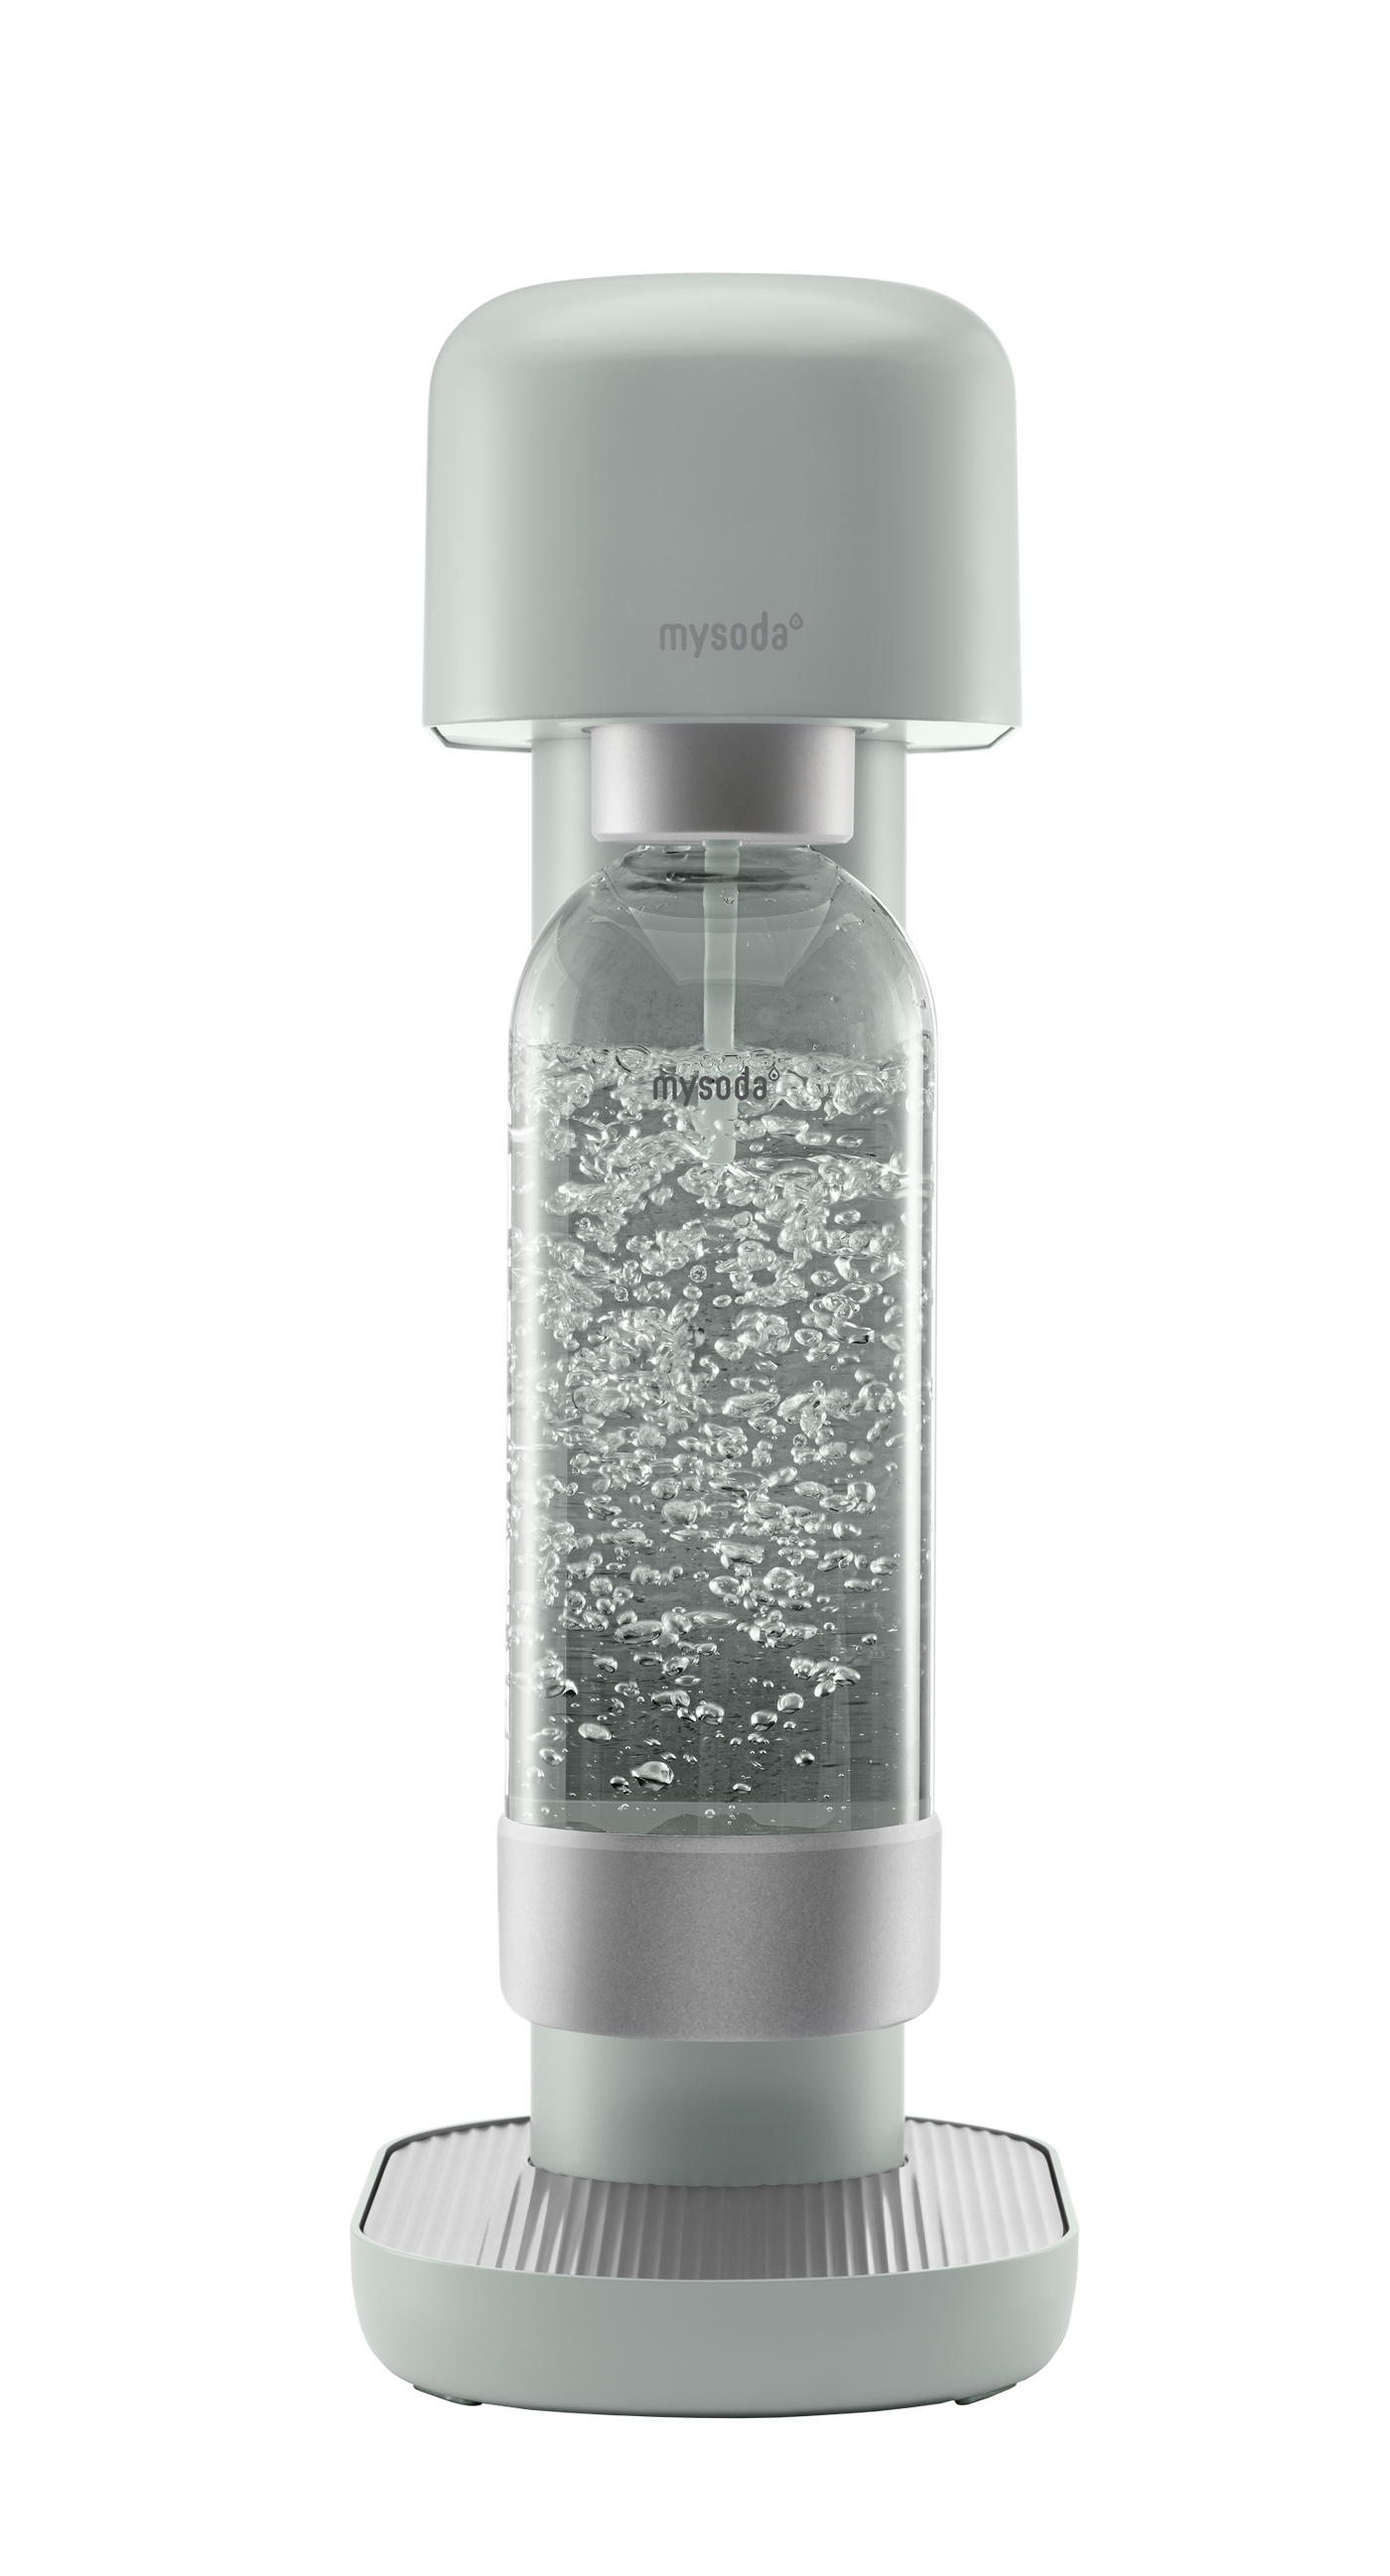 Pigeon Mysoda Ruby sparkling water maker viewed from the front